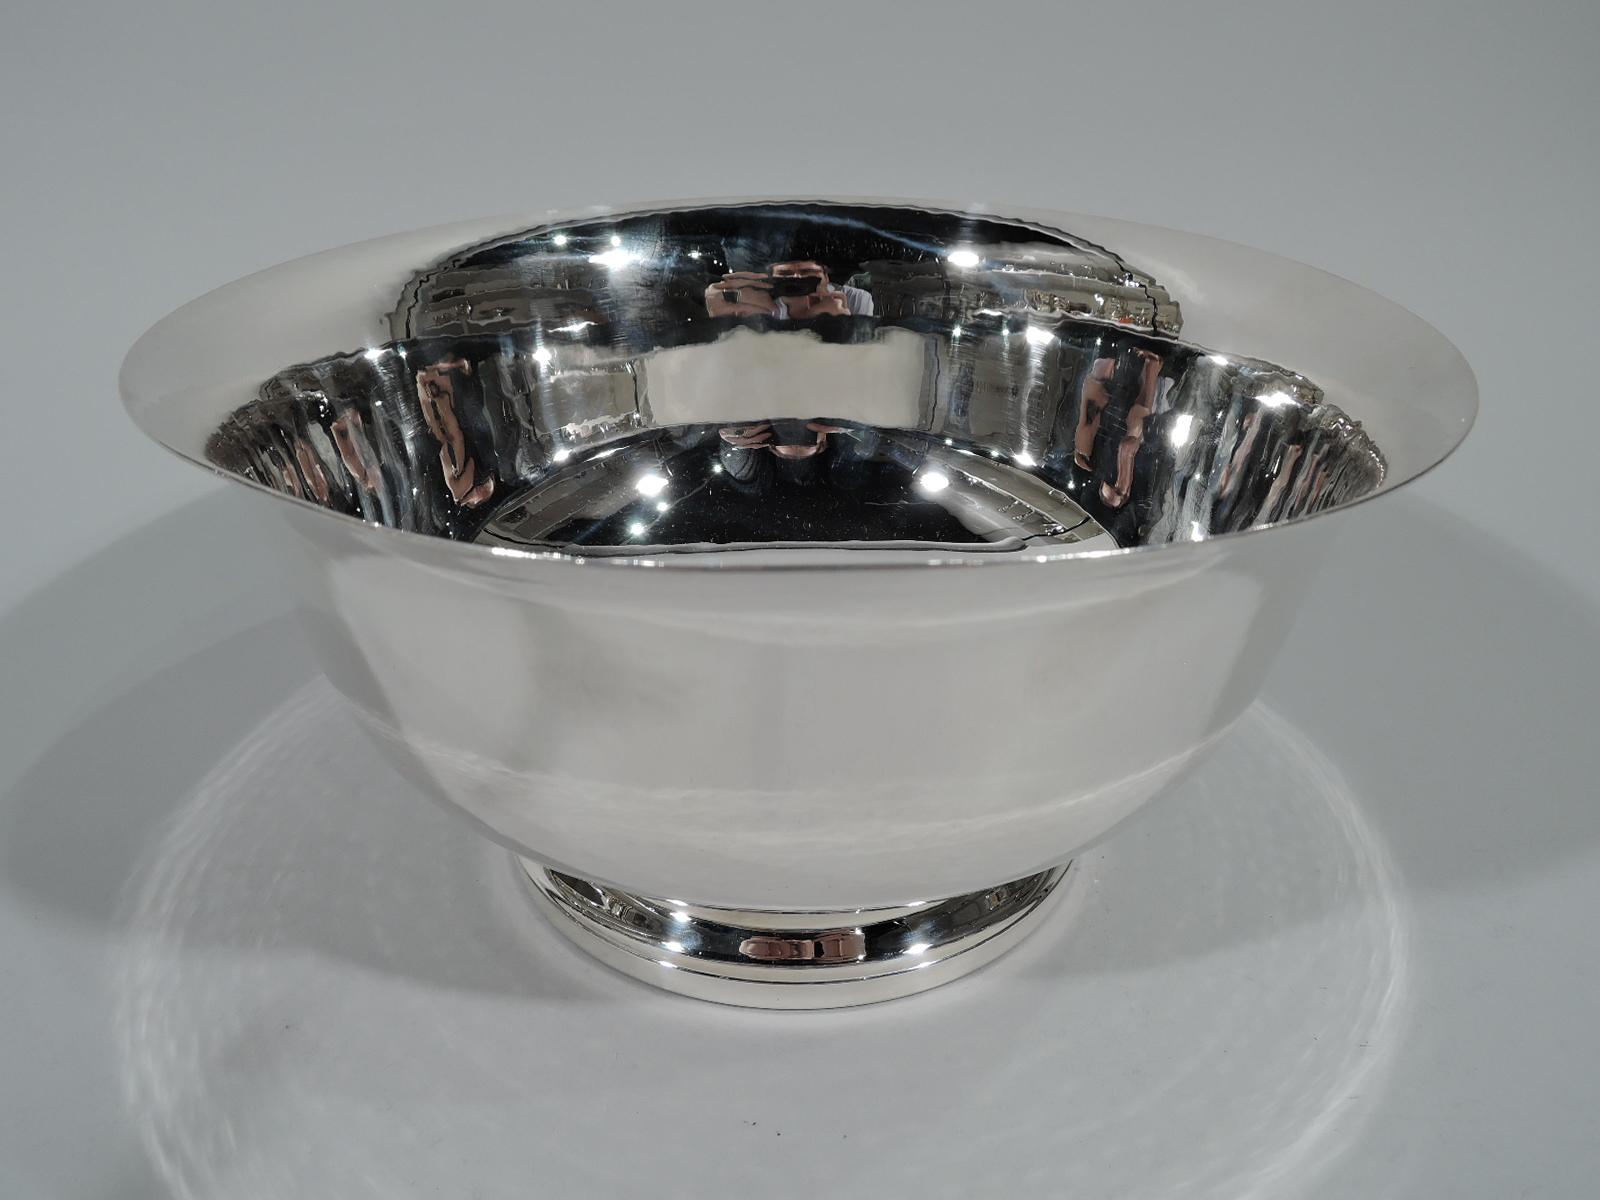 Hand-hammered sterling silver Revere bowl. Retailed by Georg Jensen Inc. USA in New York. Traditional form with curved sides, flared rim, and stepped foot. Probably made by Worden-Munnis, a Boston maker that was founded in 1940 and specialized in